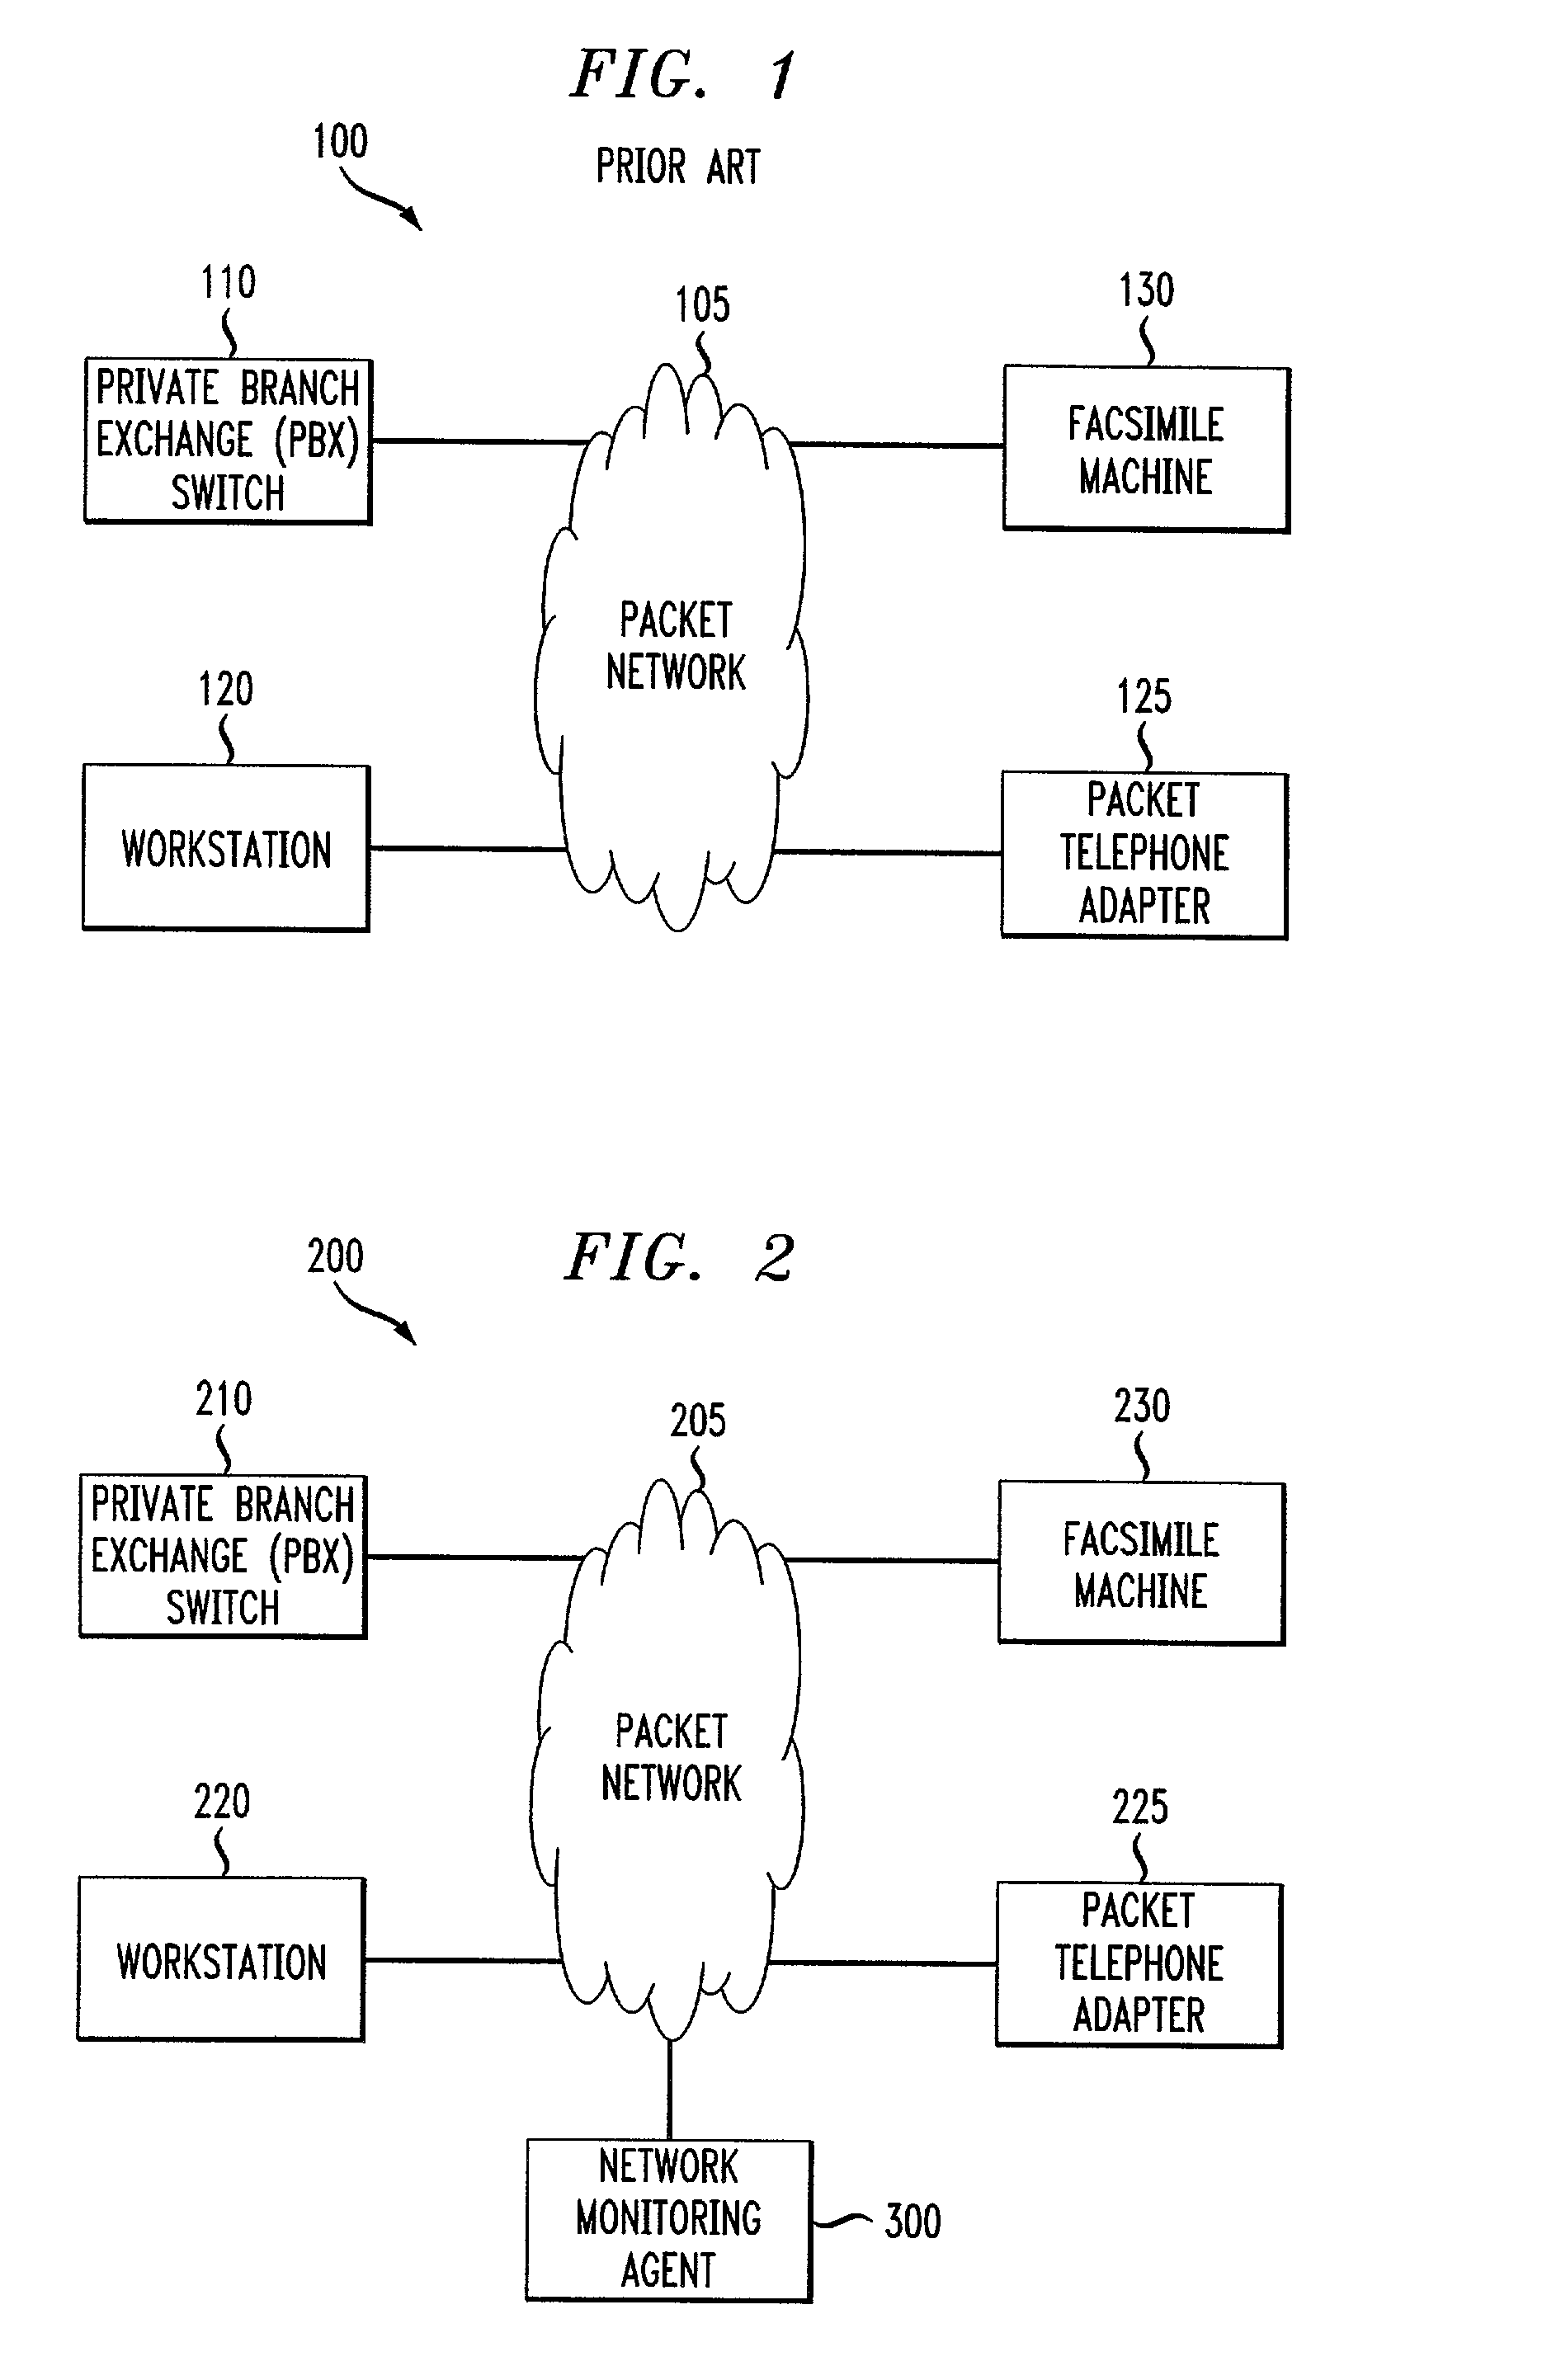 Method and apparatus for dynamically allocating bandwidth utilization in a packet telephony system